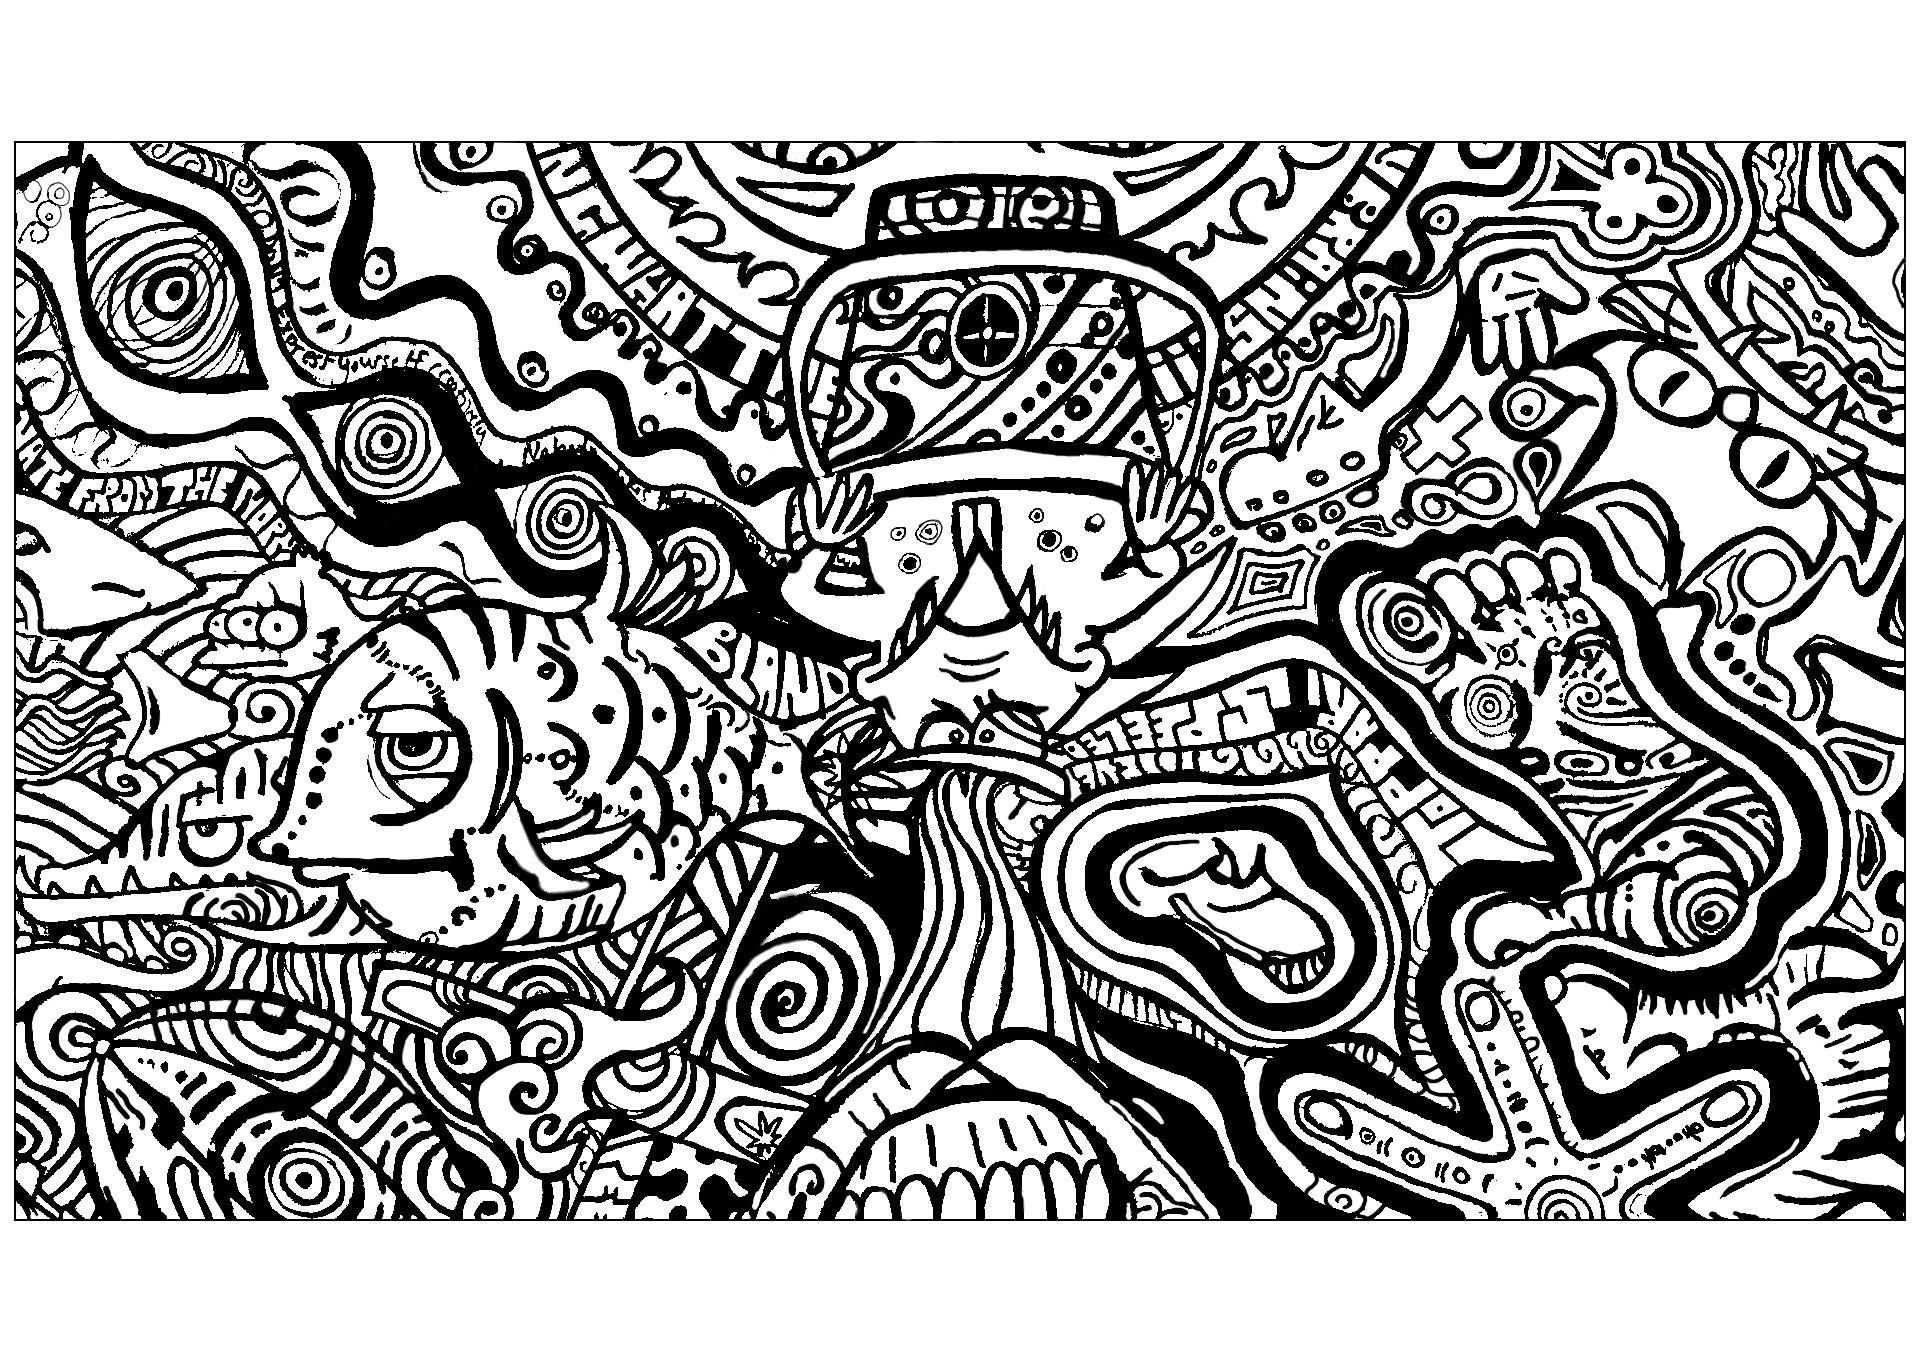 Psychedelic fish and feet Psychedelic Adult Coloring Pages